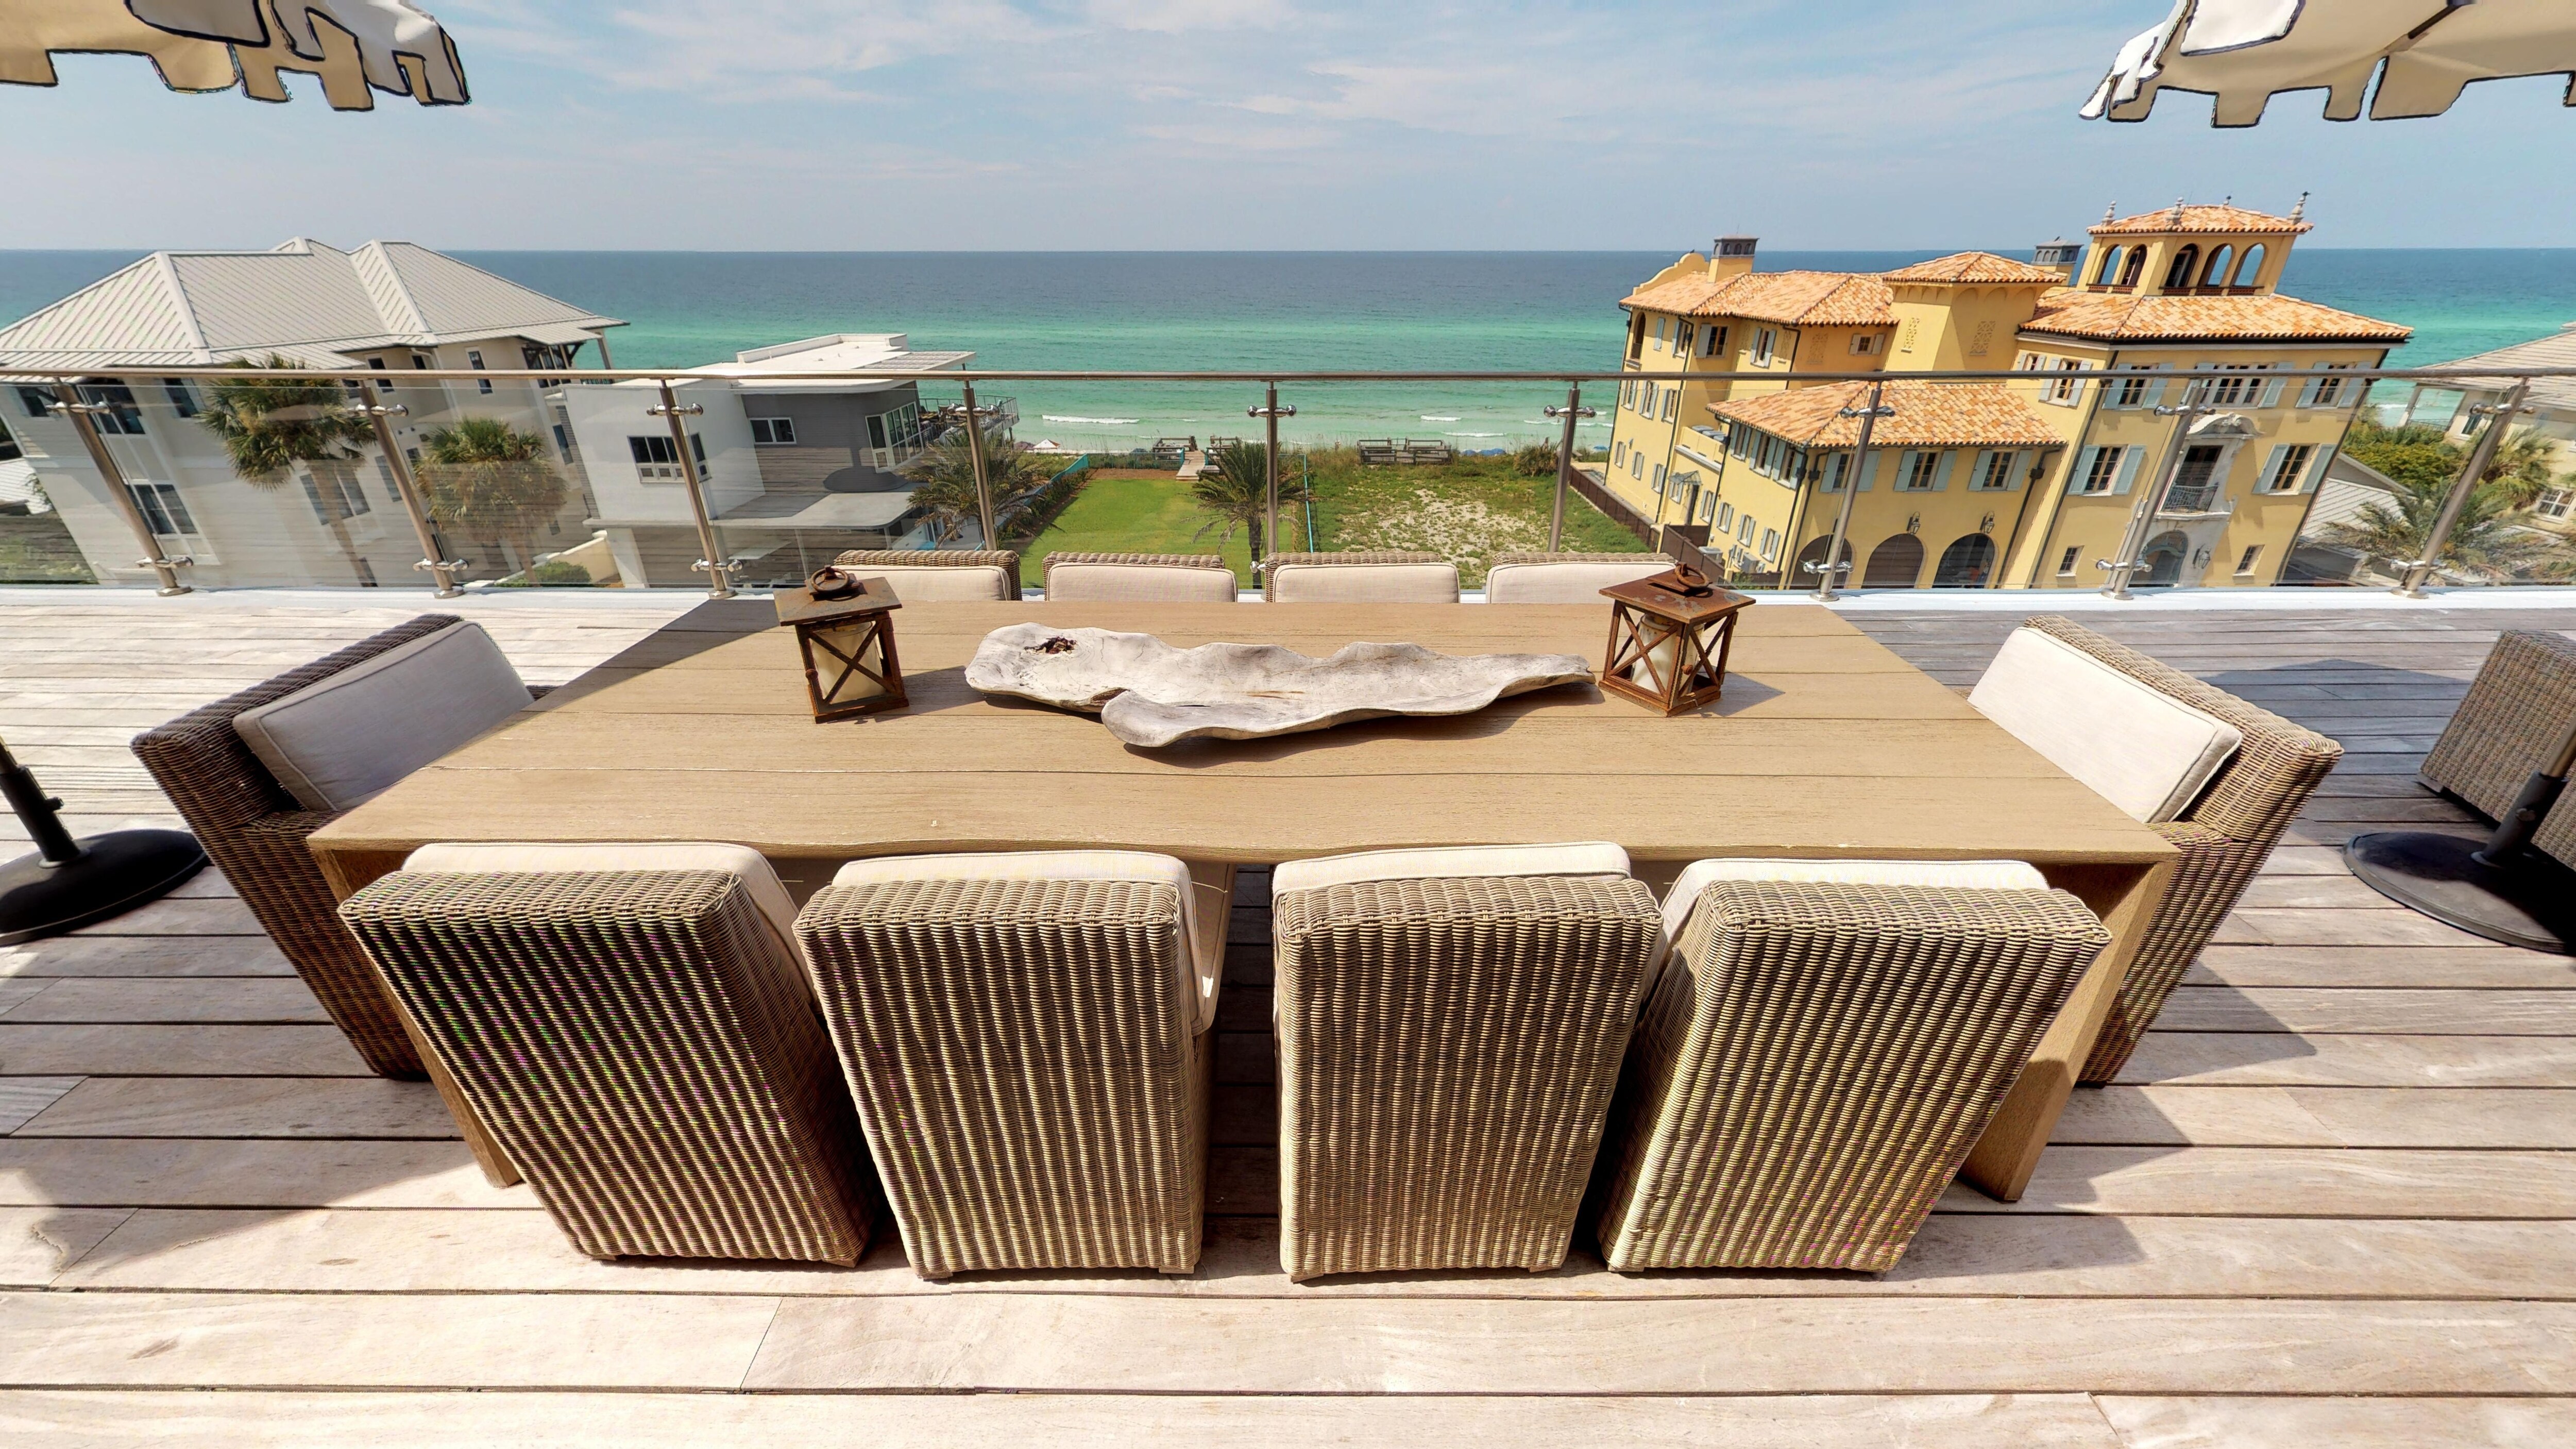 Panoramic gulf views from the oversized deck